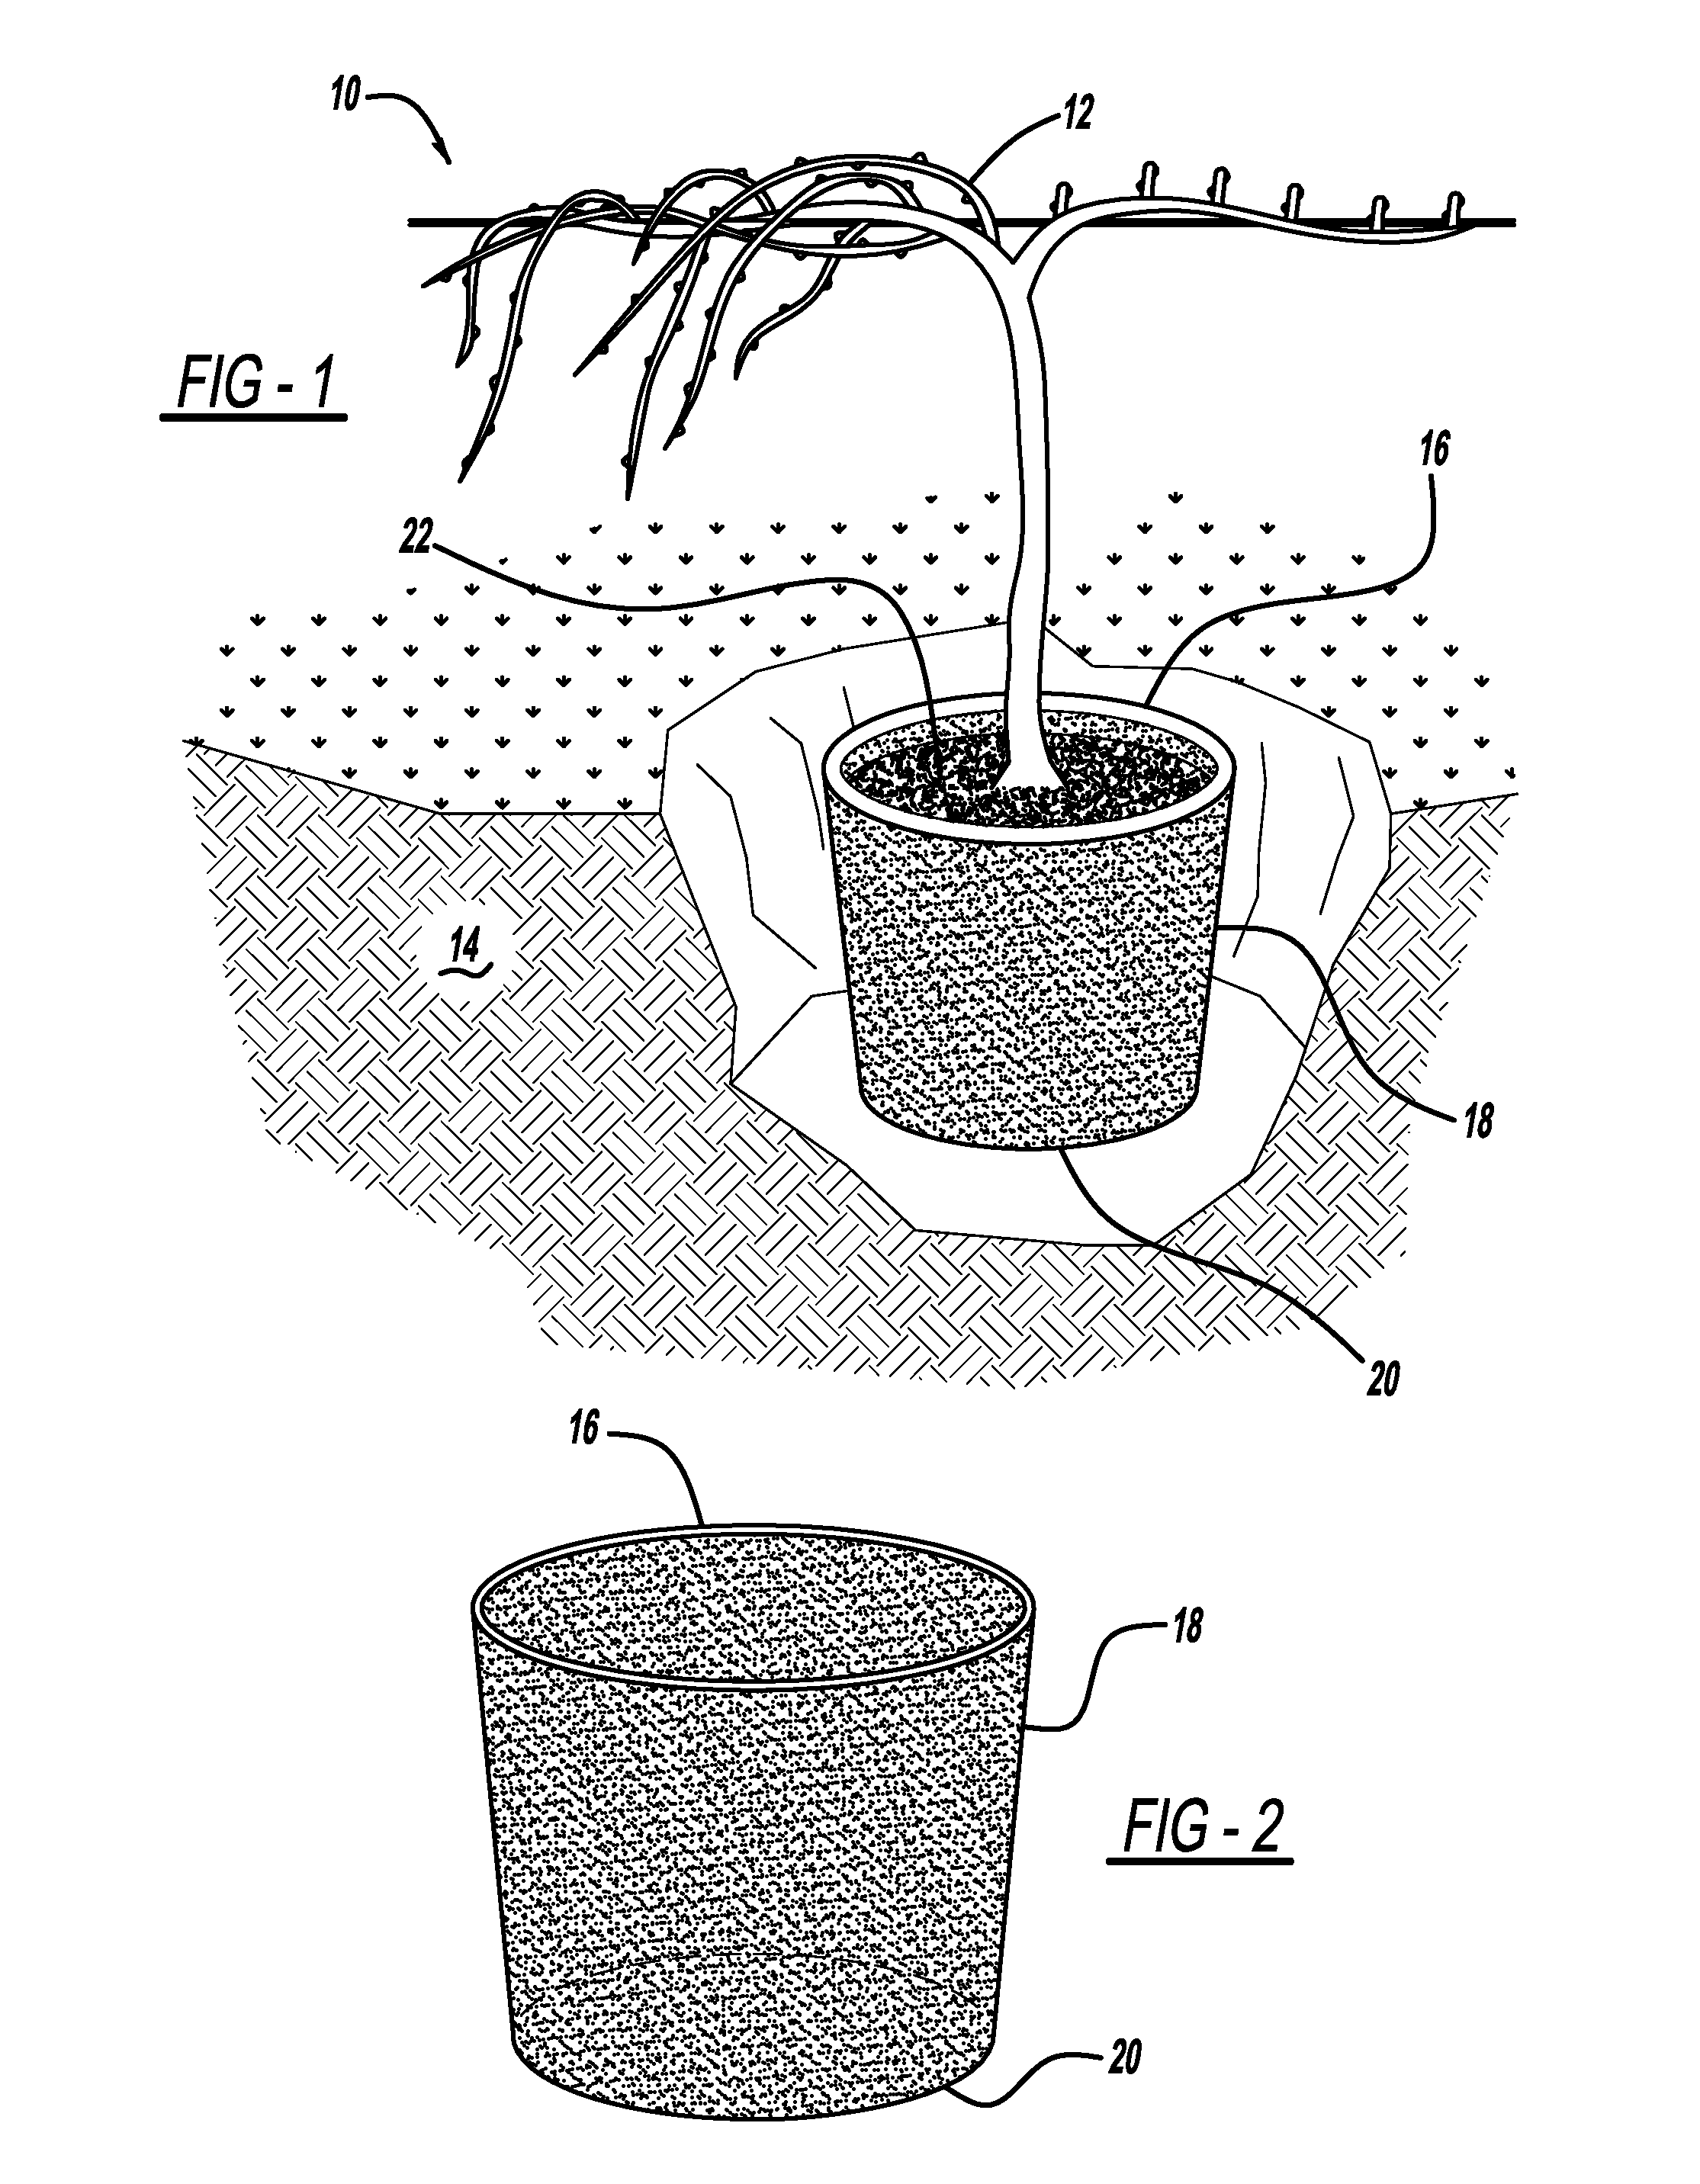 Method of Growing Grapevines